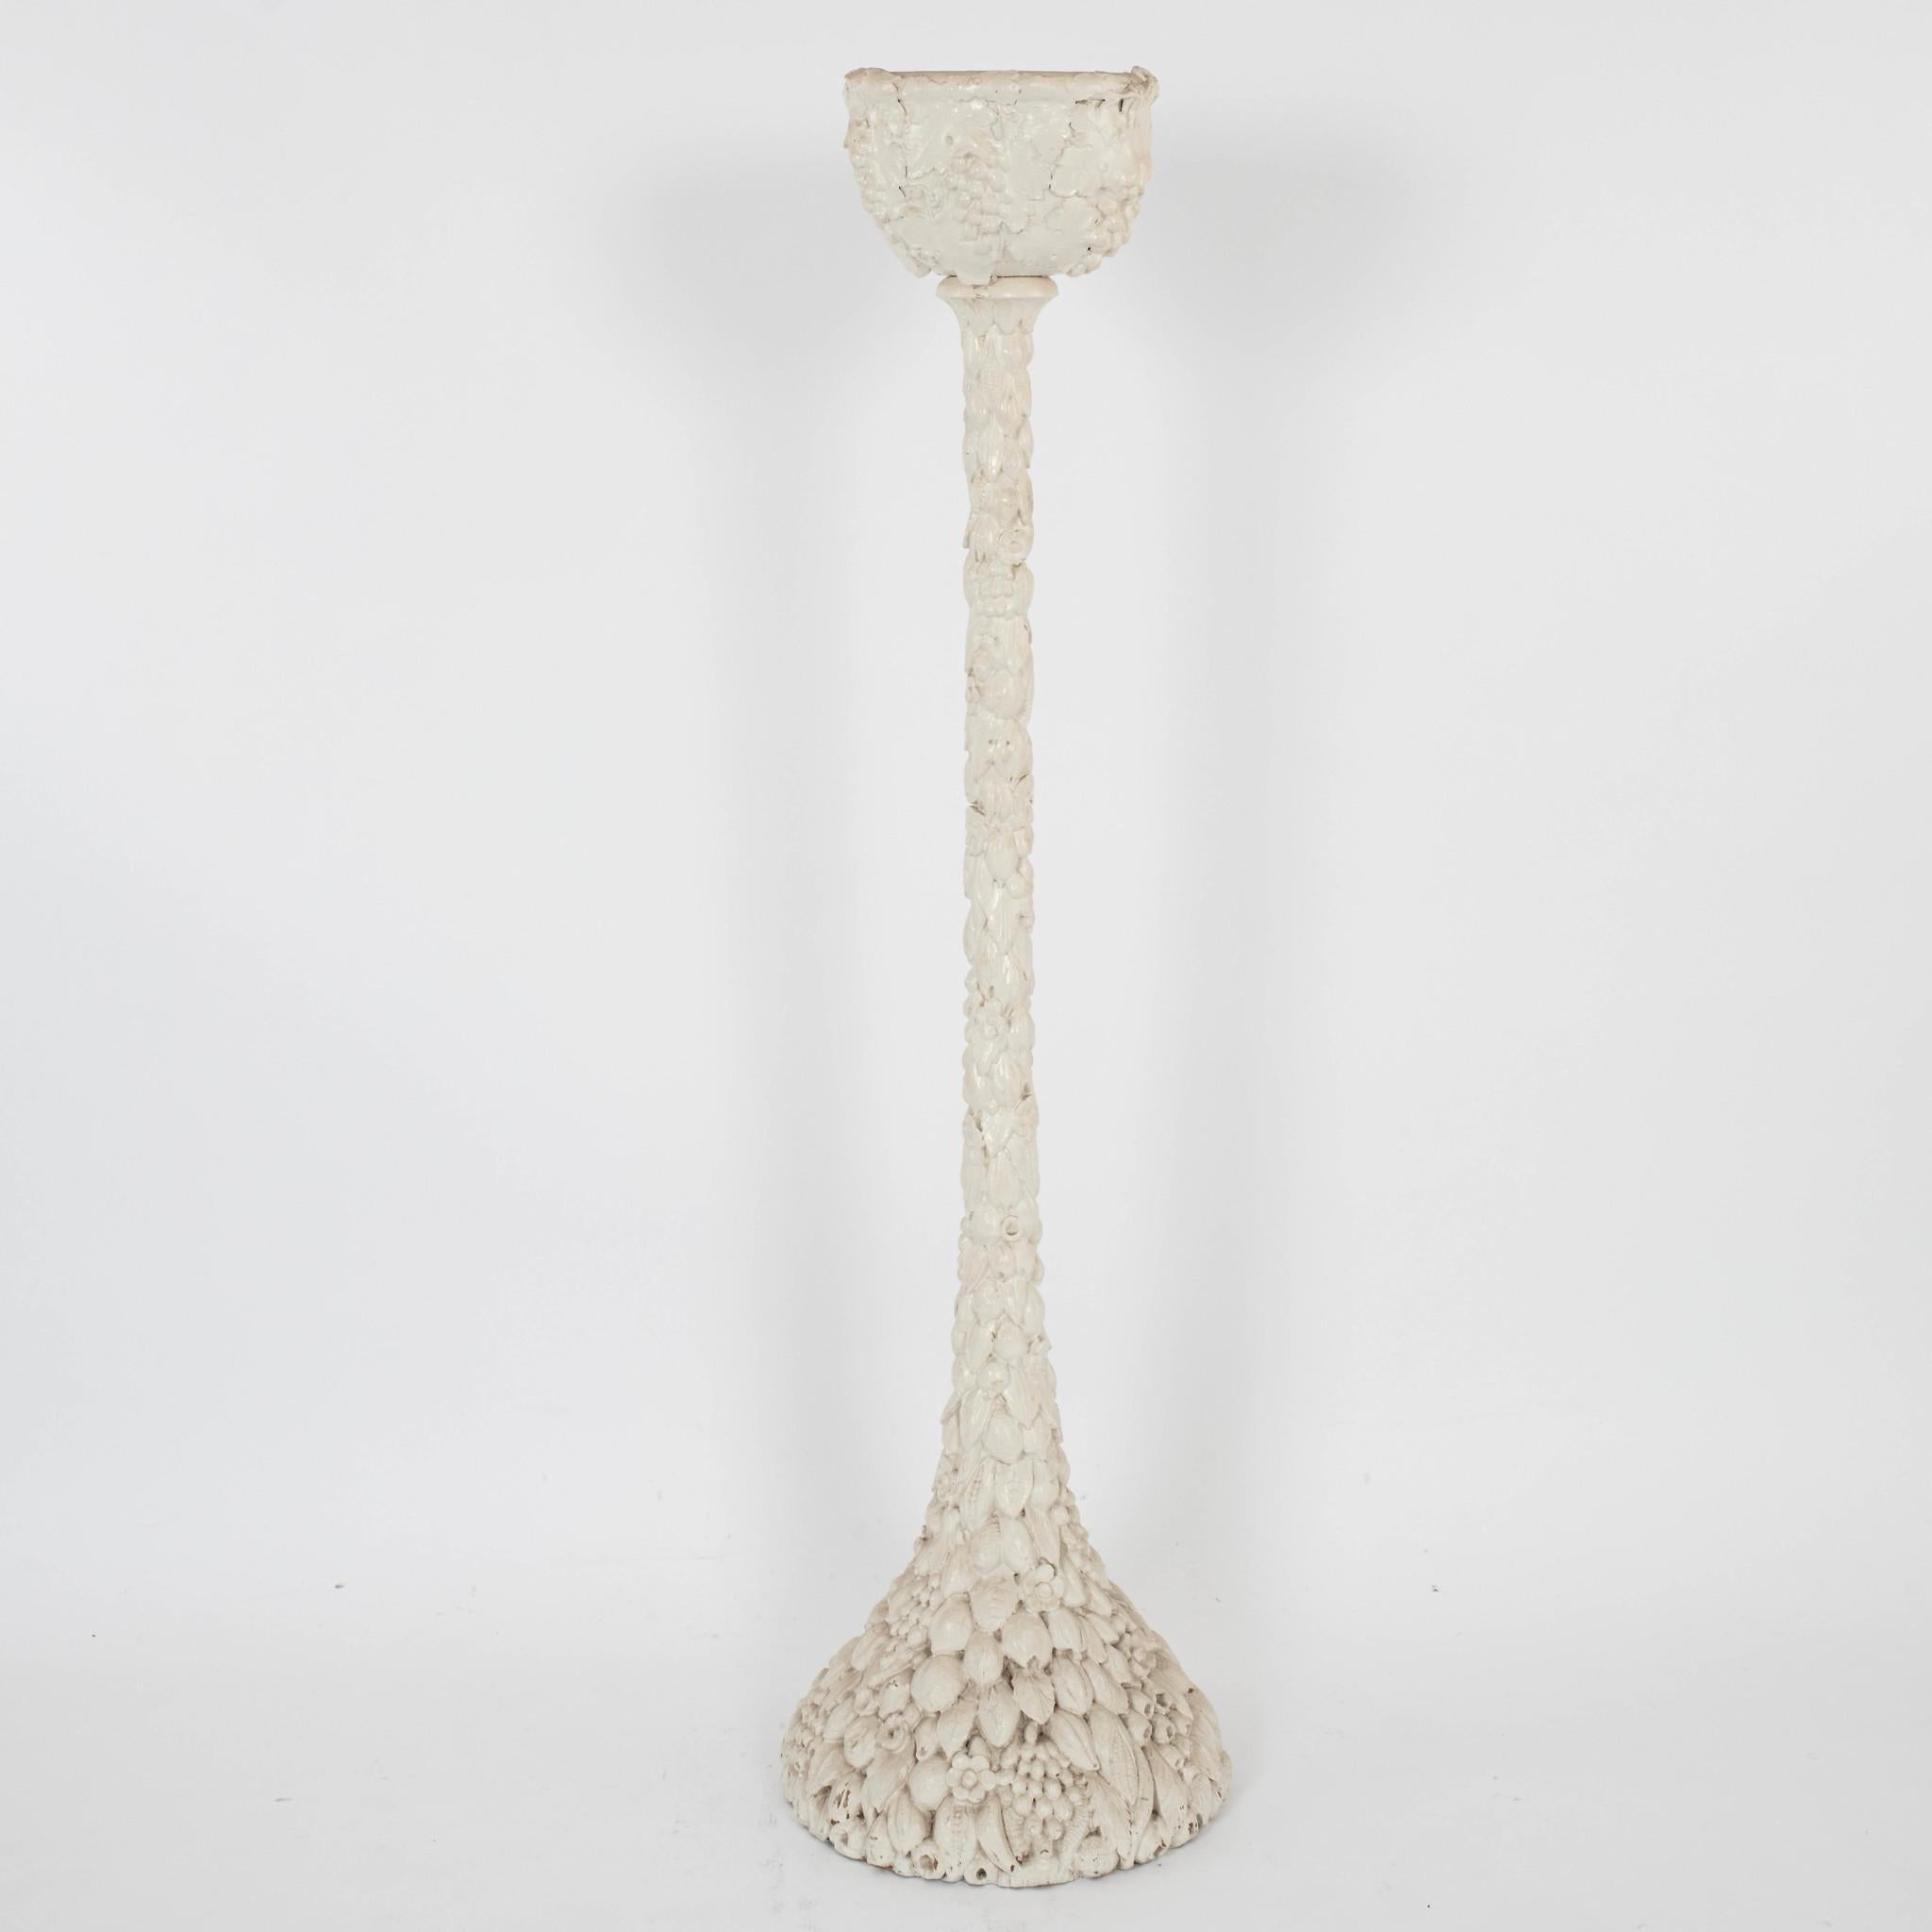 Intricately hand carved French torchere style floor lamp featuring an abundance of fruit nuts and foliage.